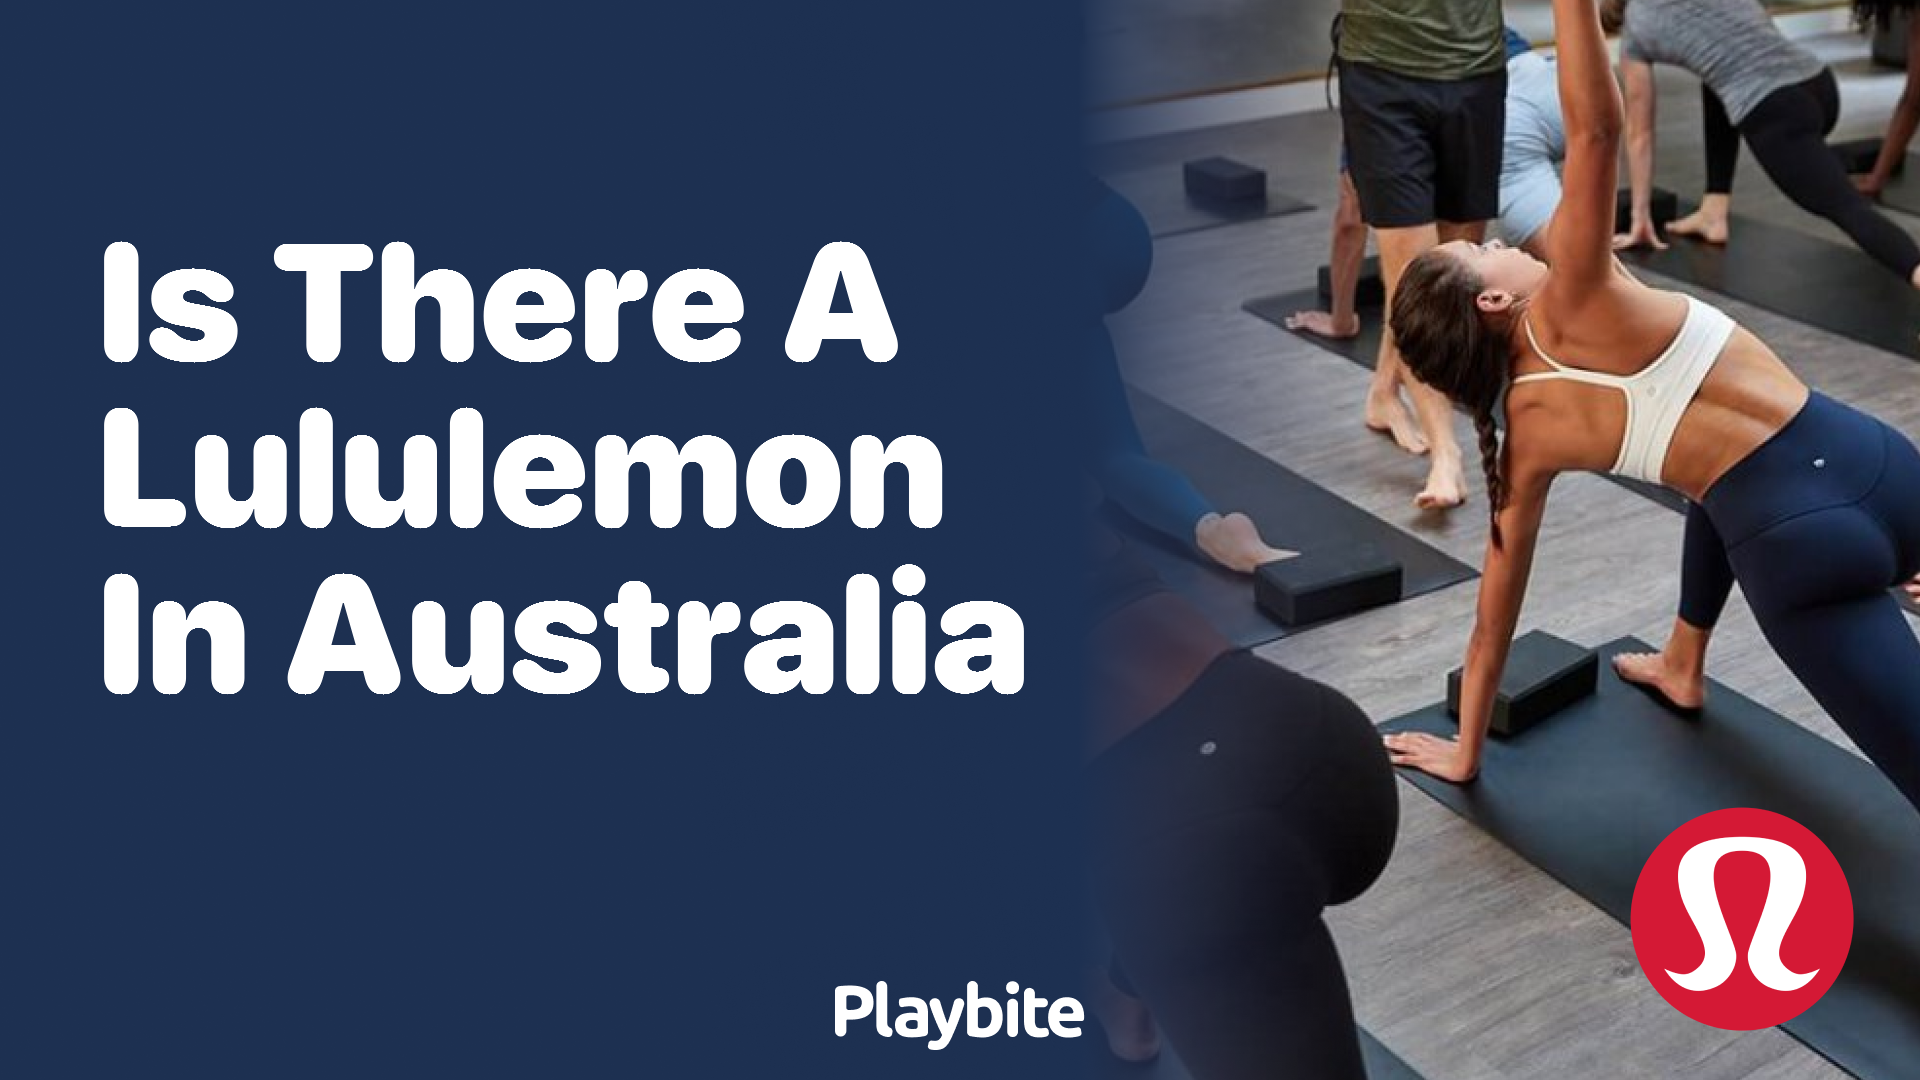 Is There a Lululemon in Australia? Find Out Here! - Playbite